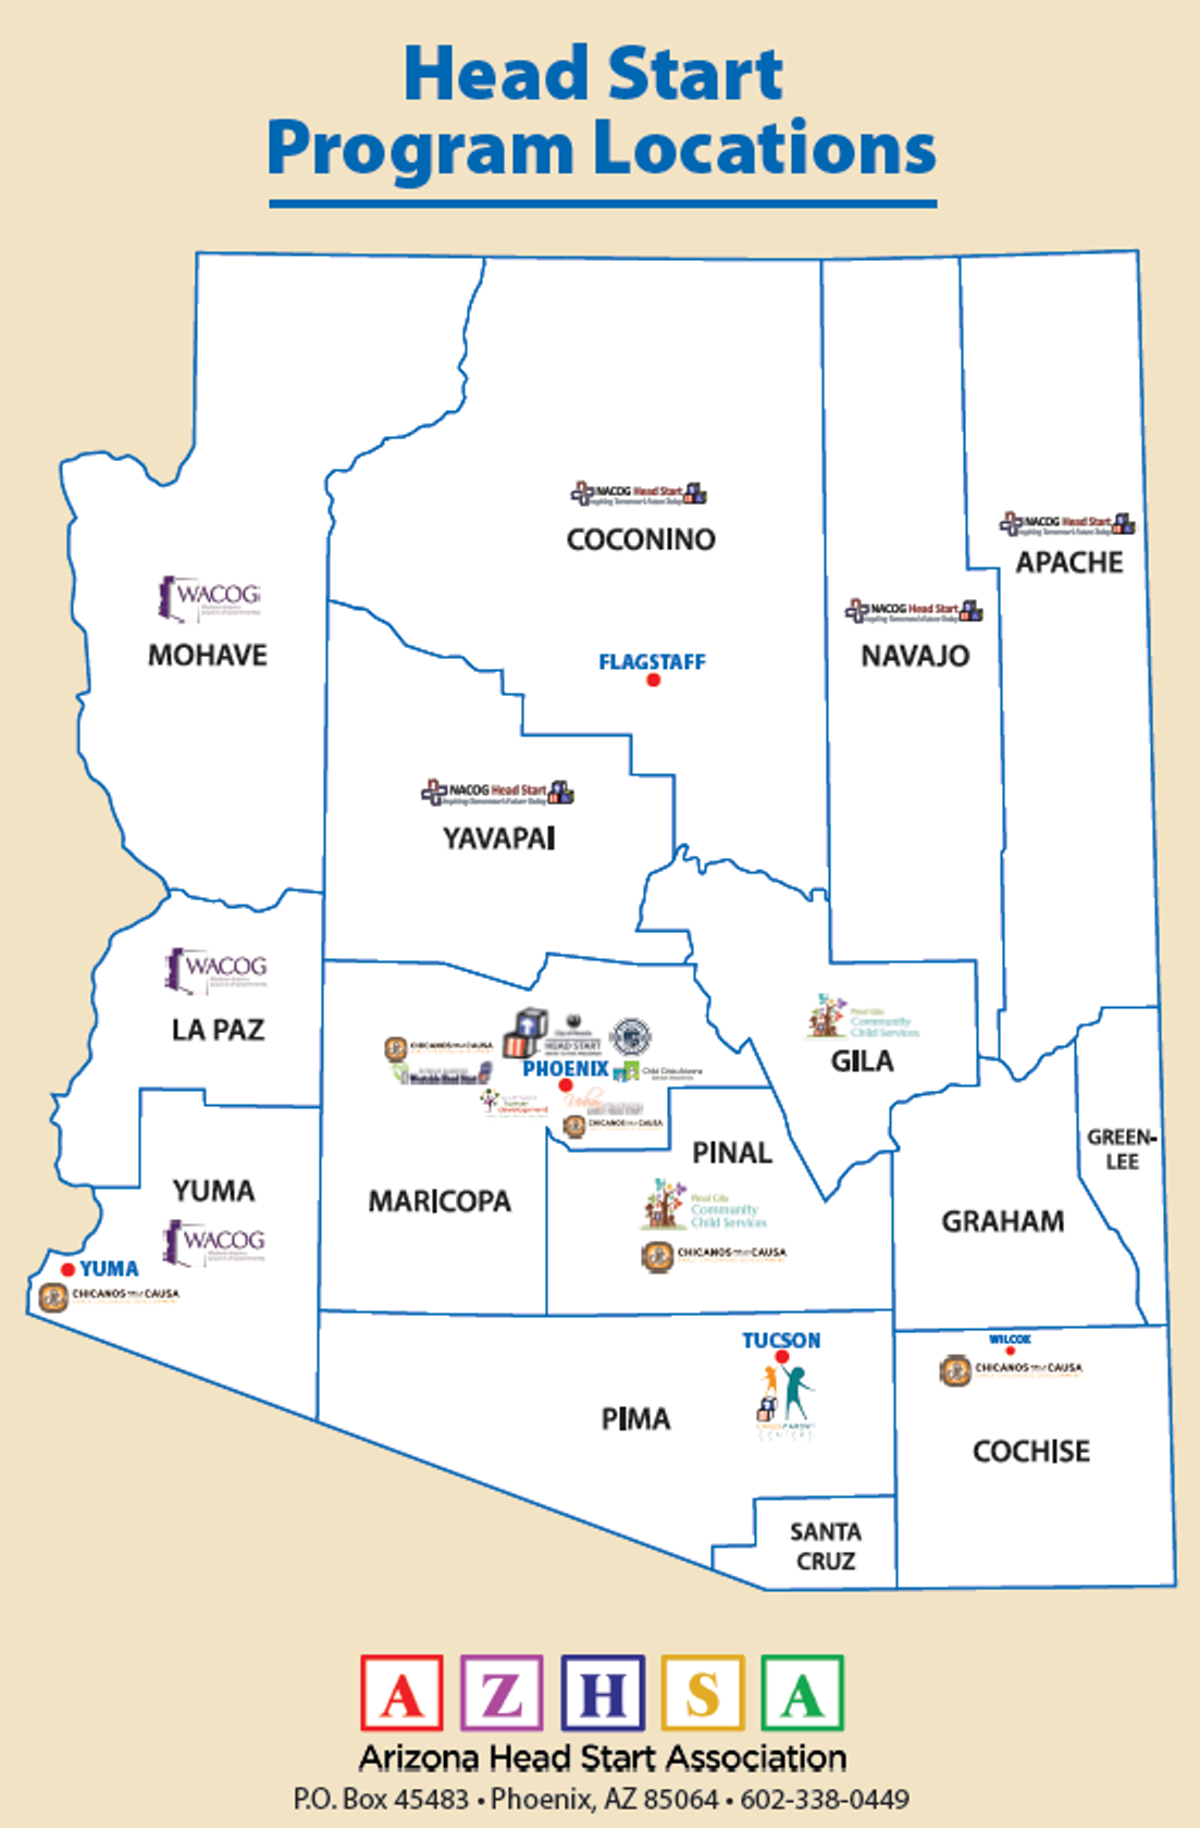 Map of Head Start Locations in Arizona by County